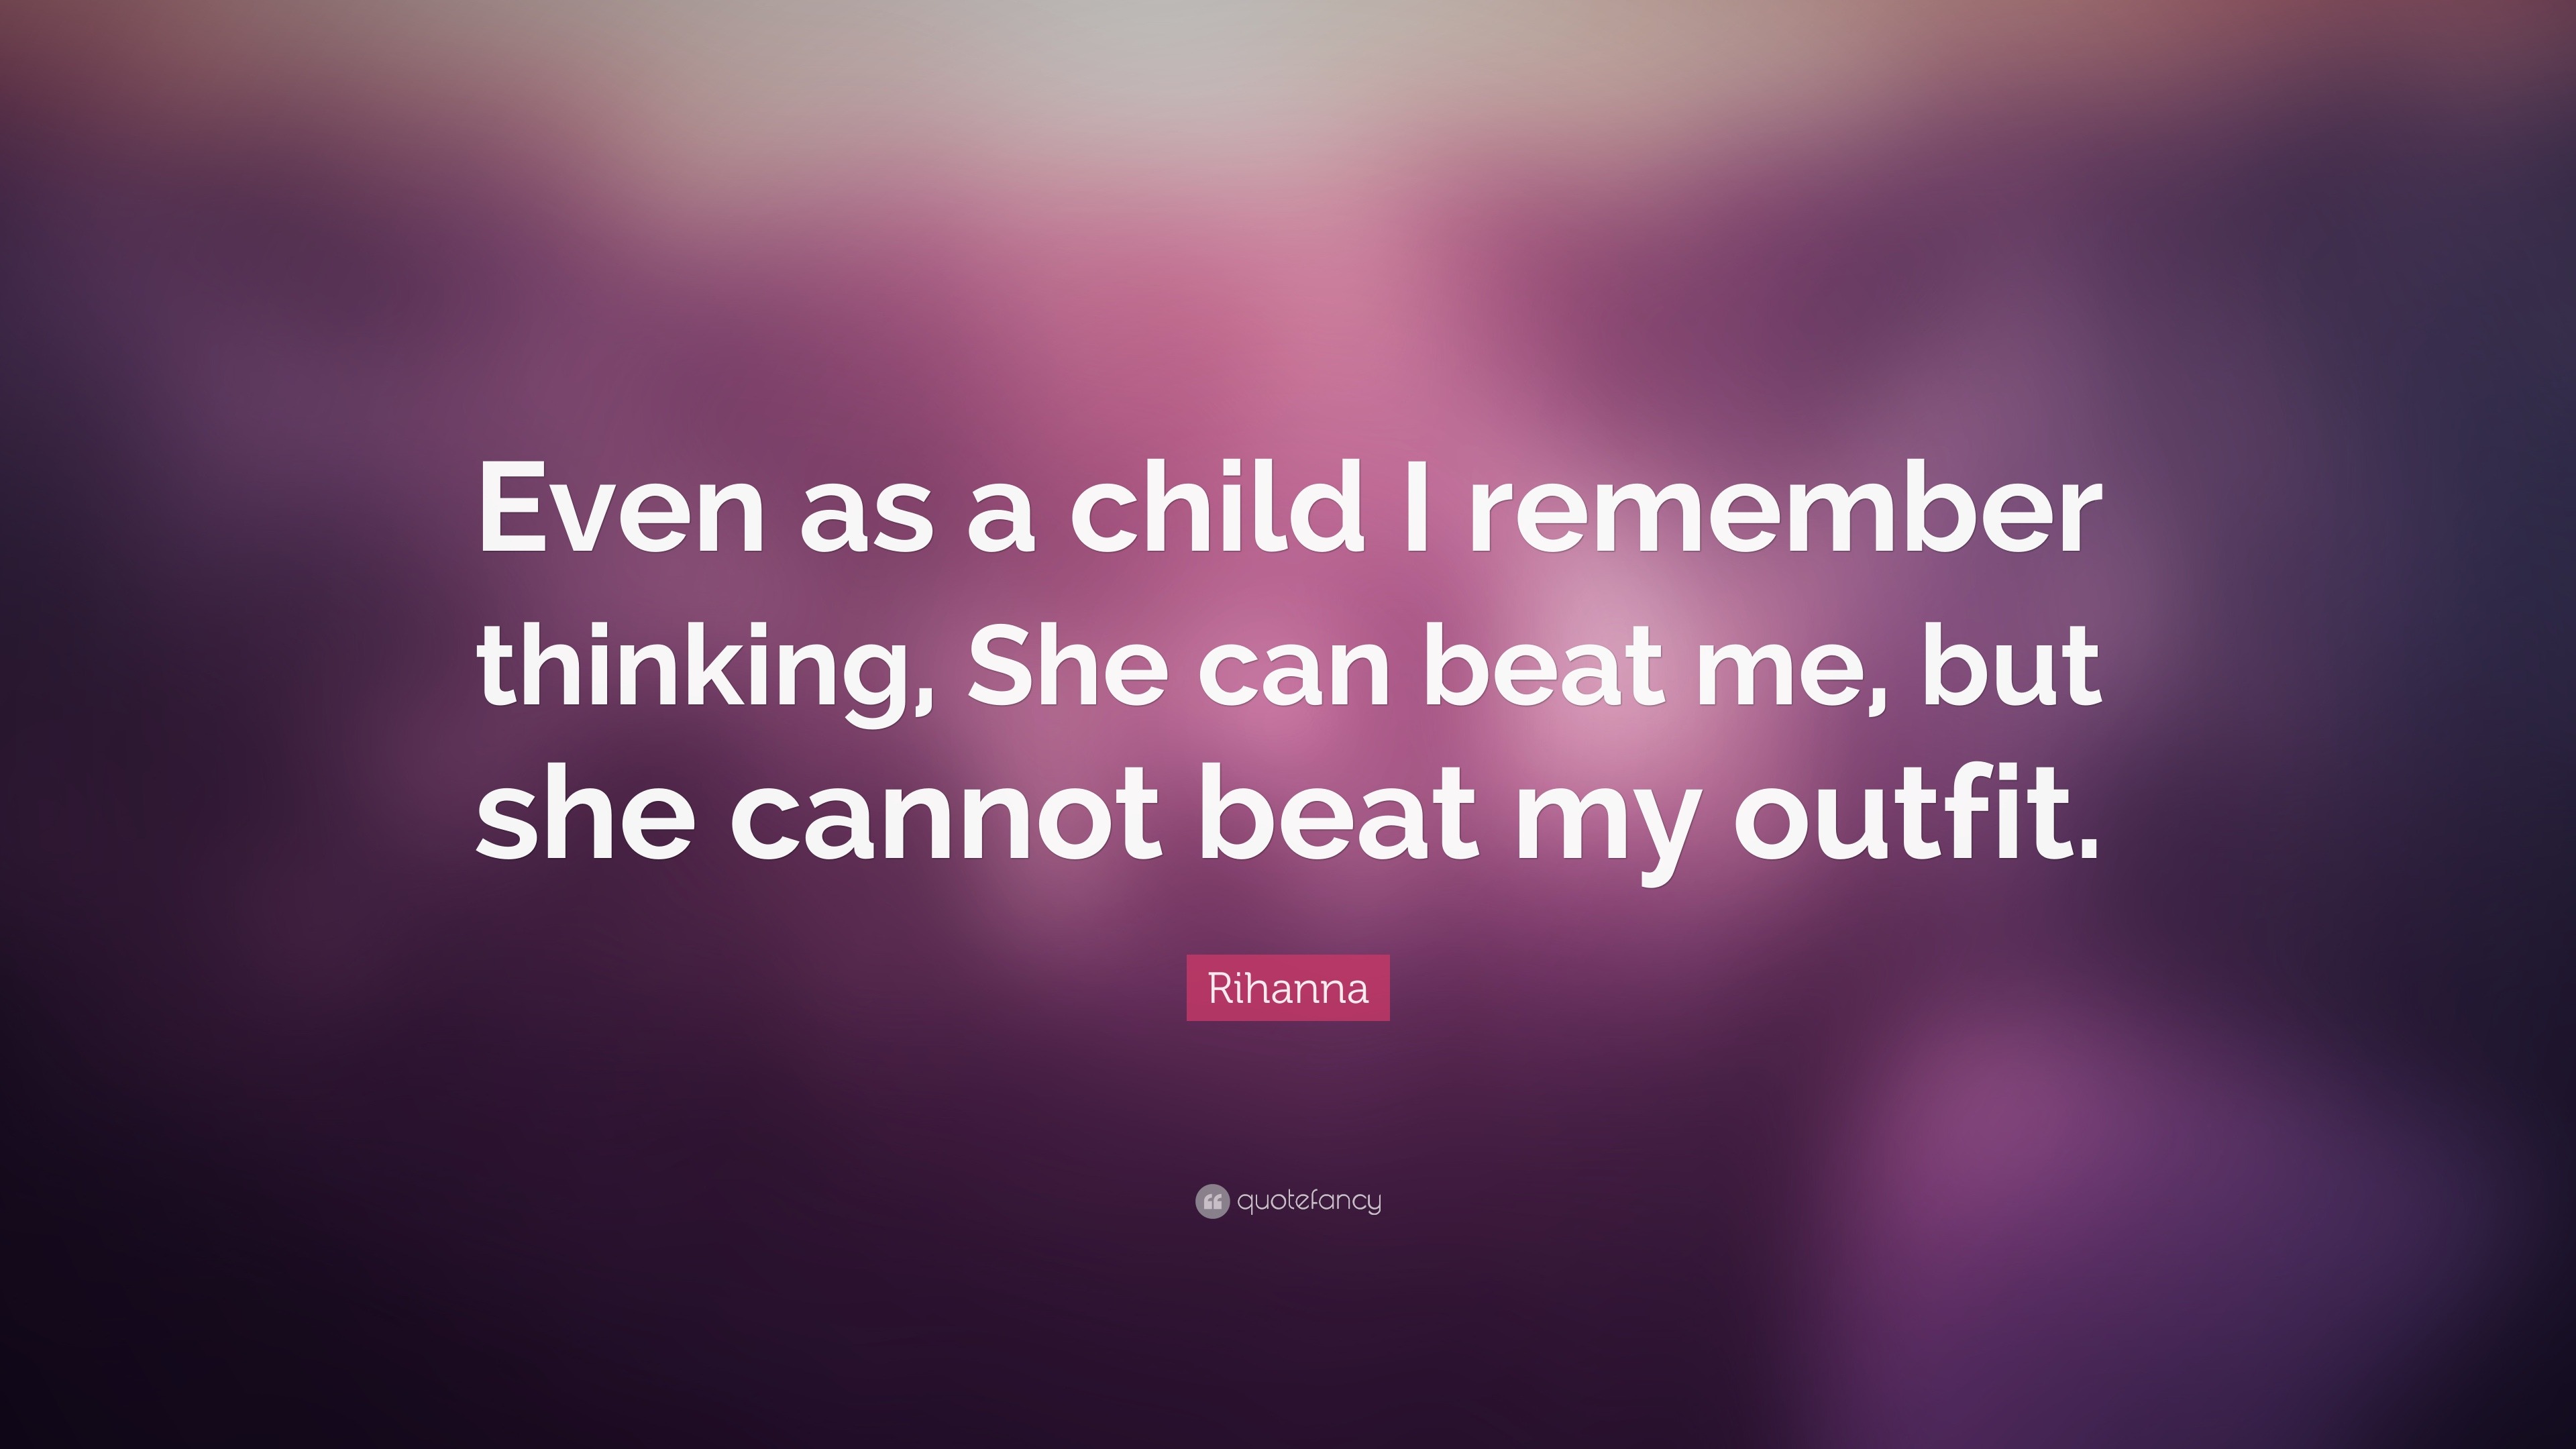 Rihanna Quote: “Even as a child I remember thinking, She can beat me ...